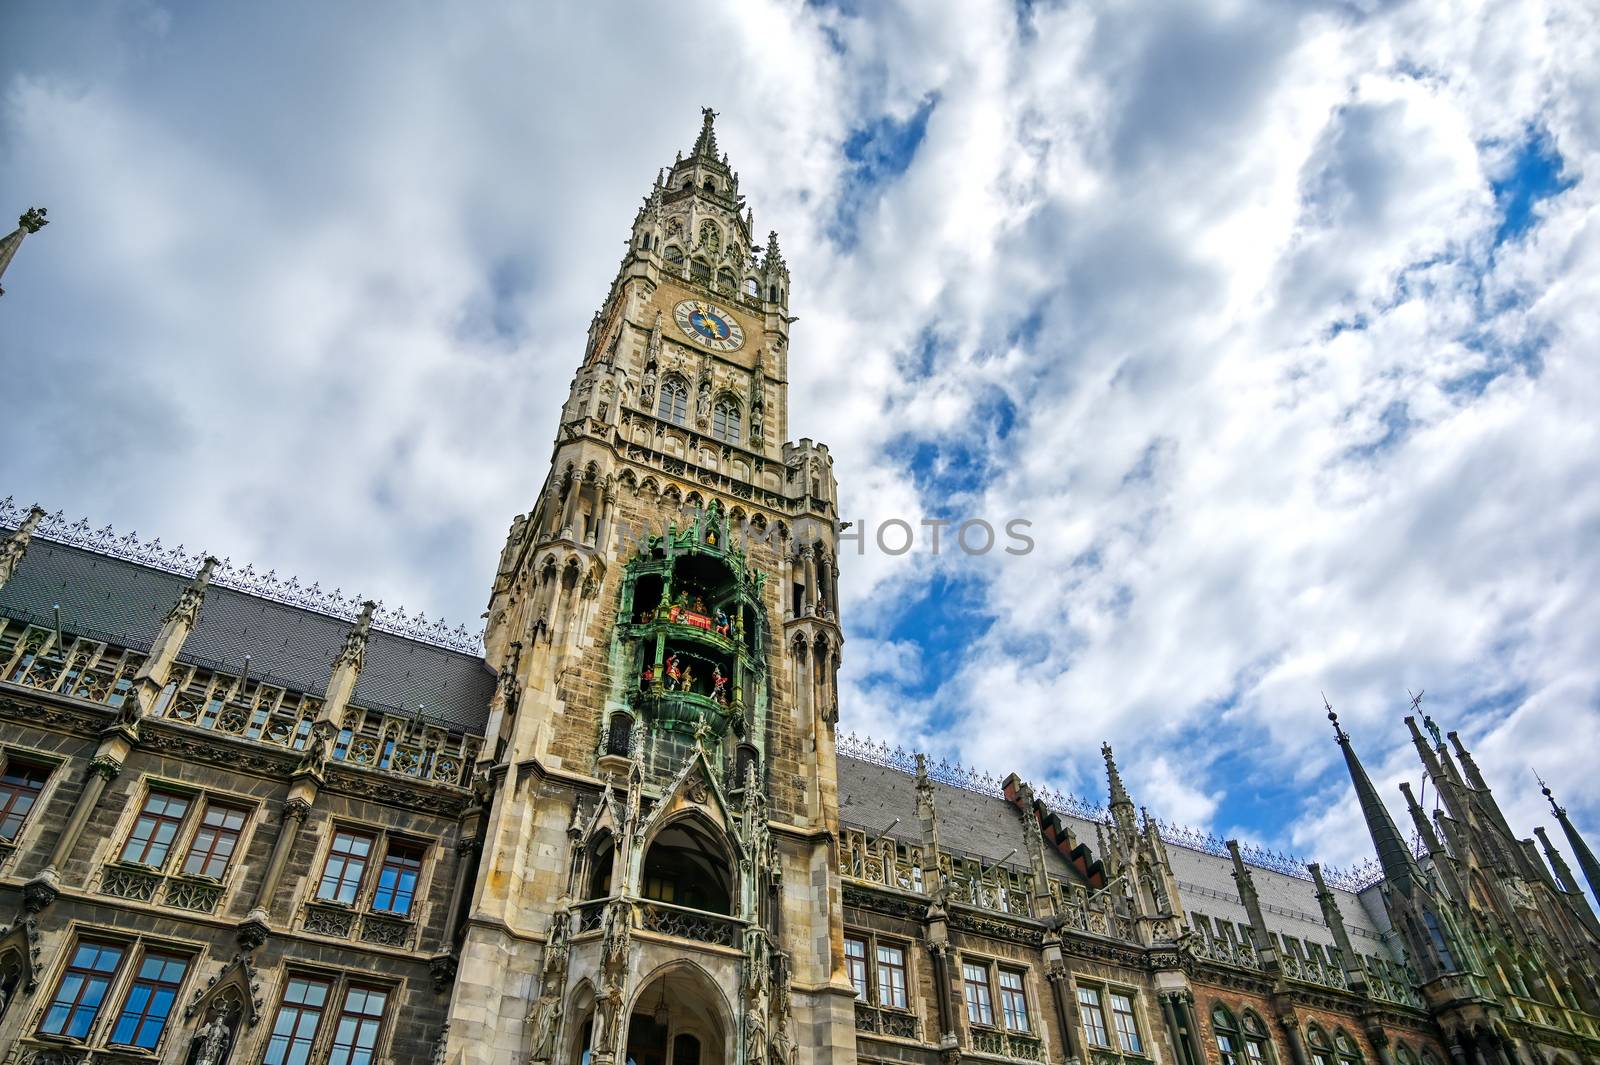 The New Town Hall in Munich, Germany by jbyard22